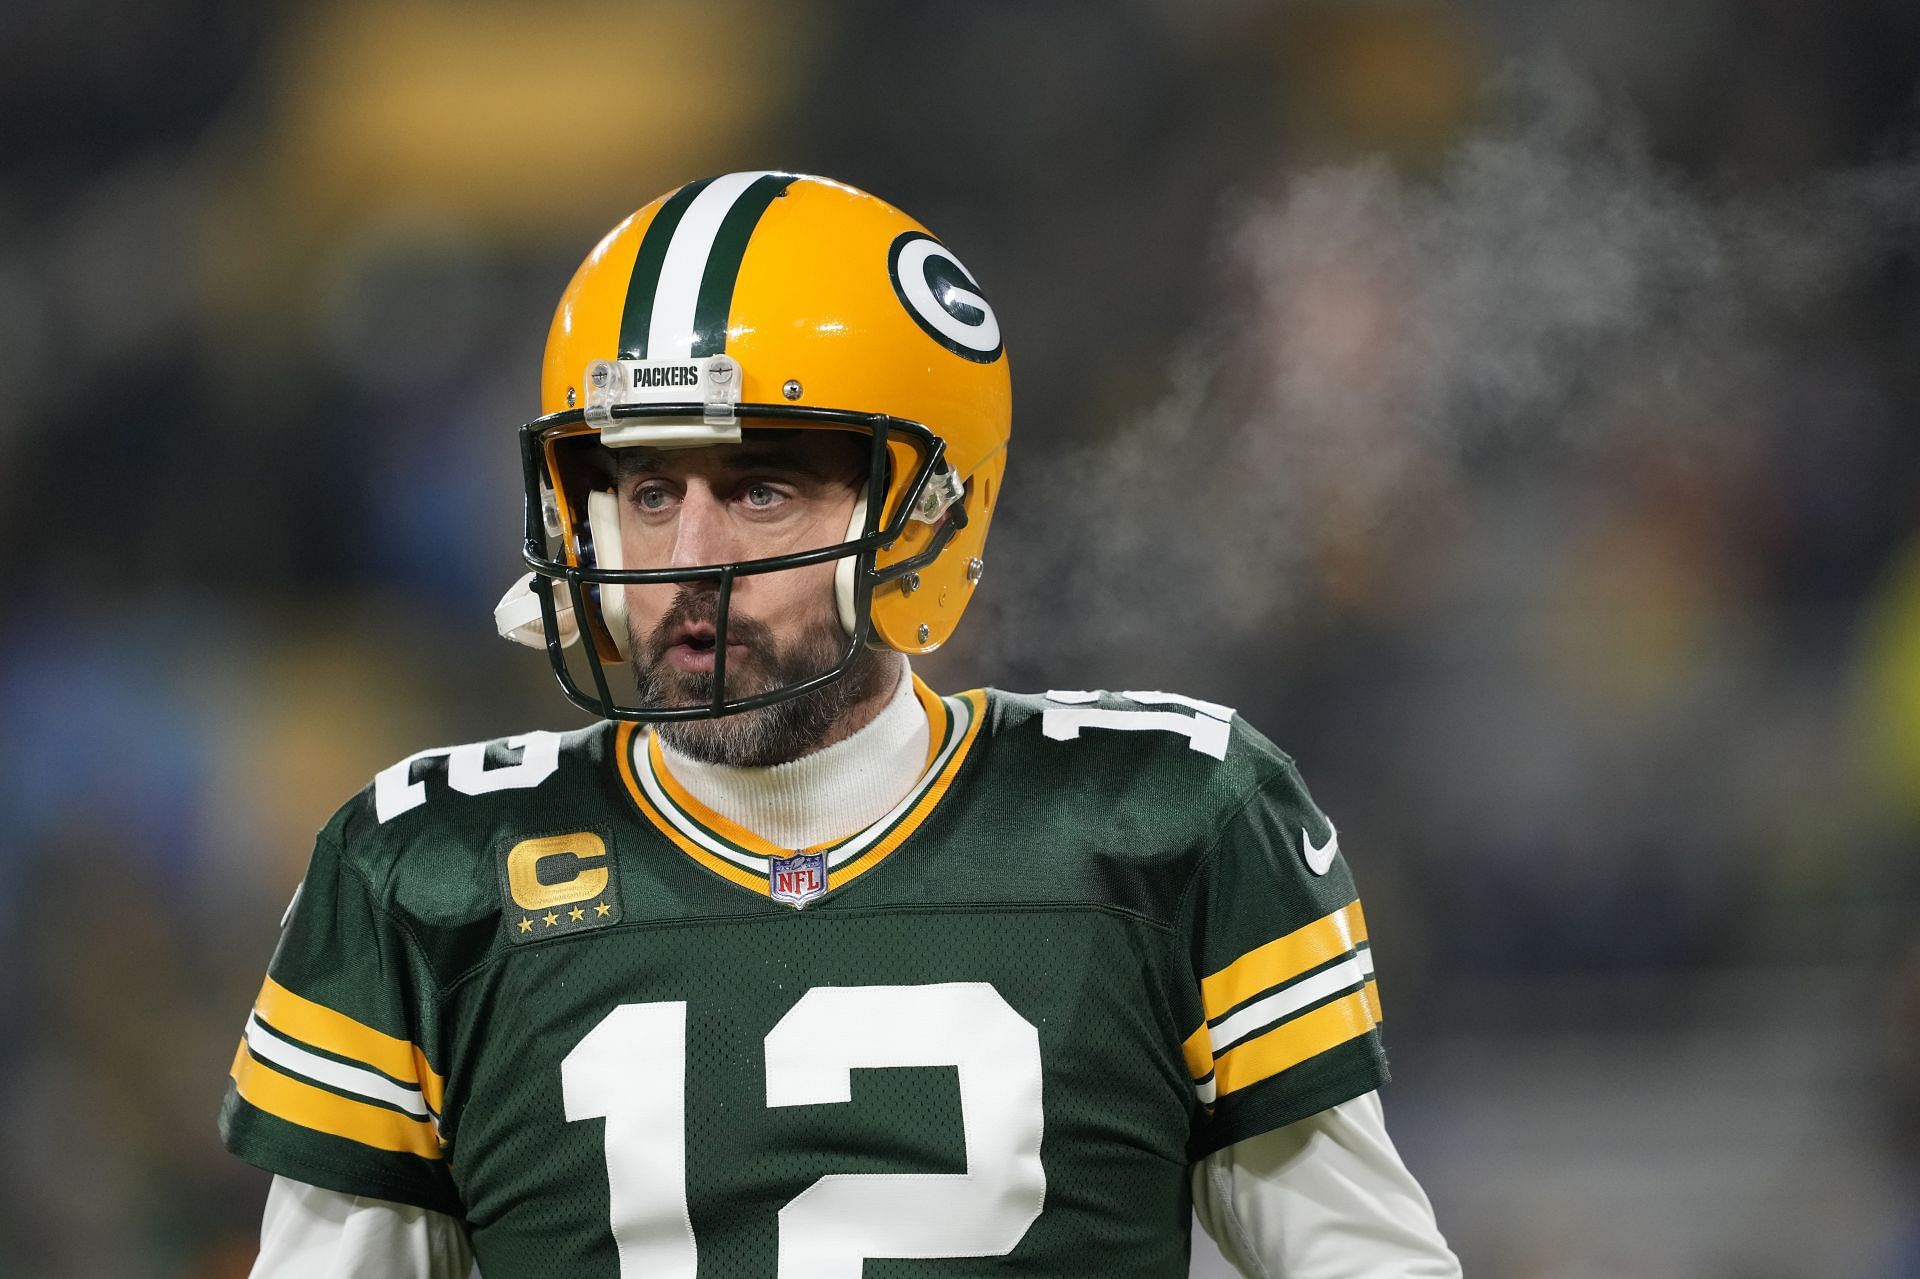 How will the Jets' salary space be affected if Aaron Rodgers signs with the  Jets in 2023? Exploring the Aaron Rodgers-Jets contract situation